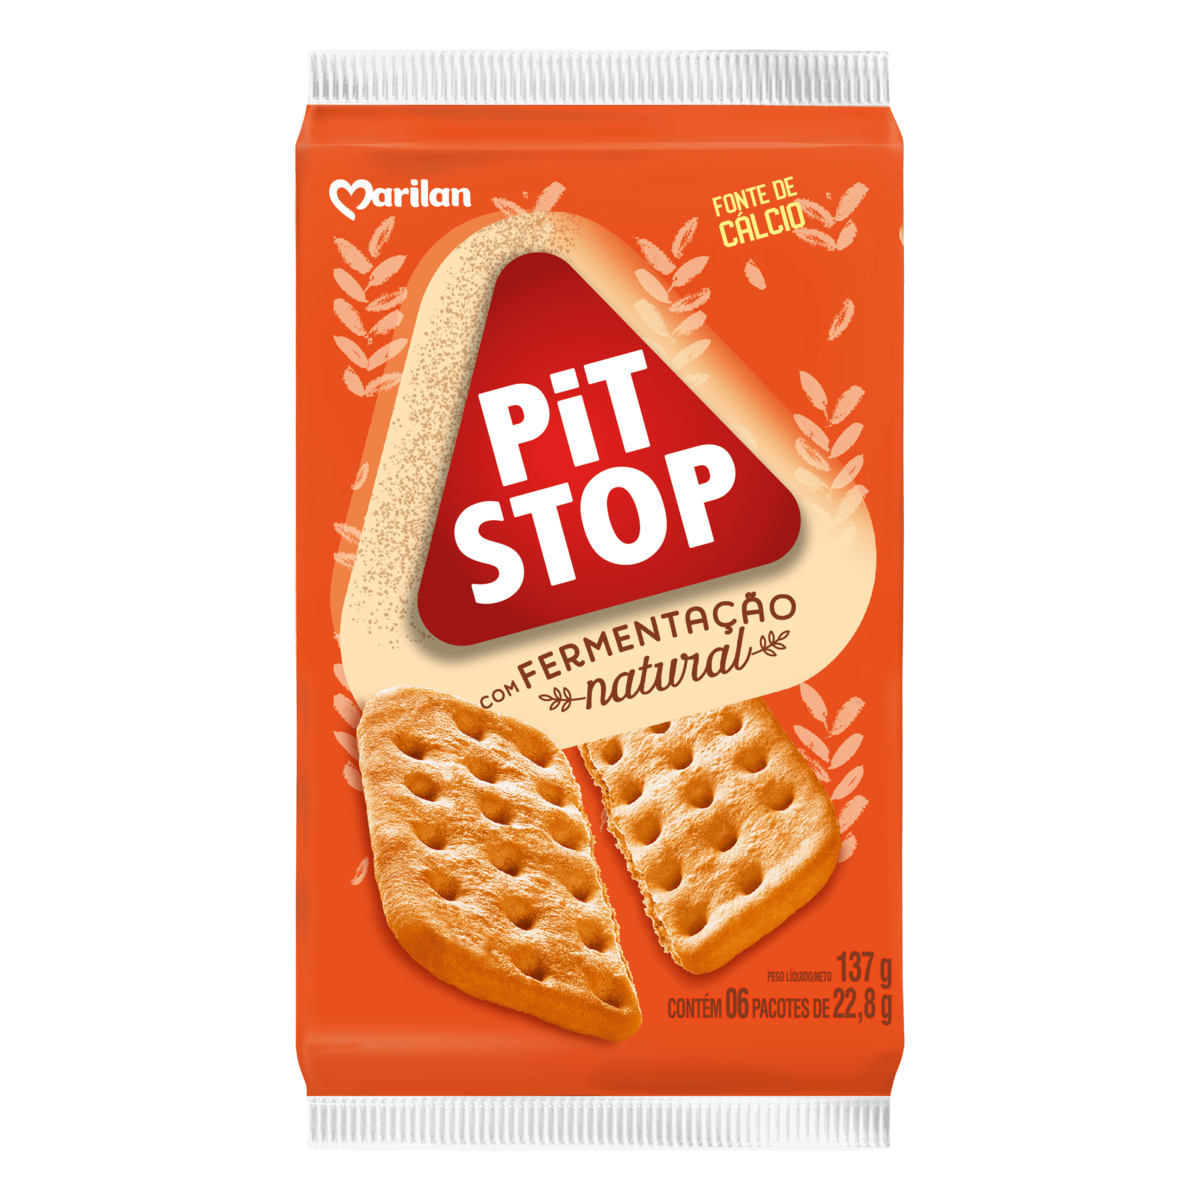 7896003739411 - PACK BISCOITO MARILAN PIT STOP PACOTE 137G 6 UNIDADES